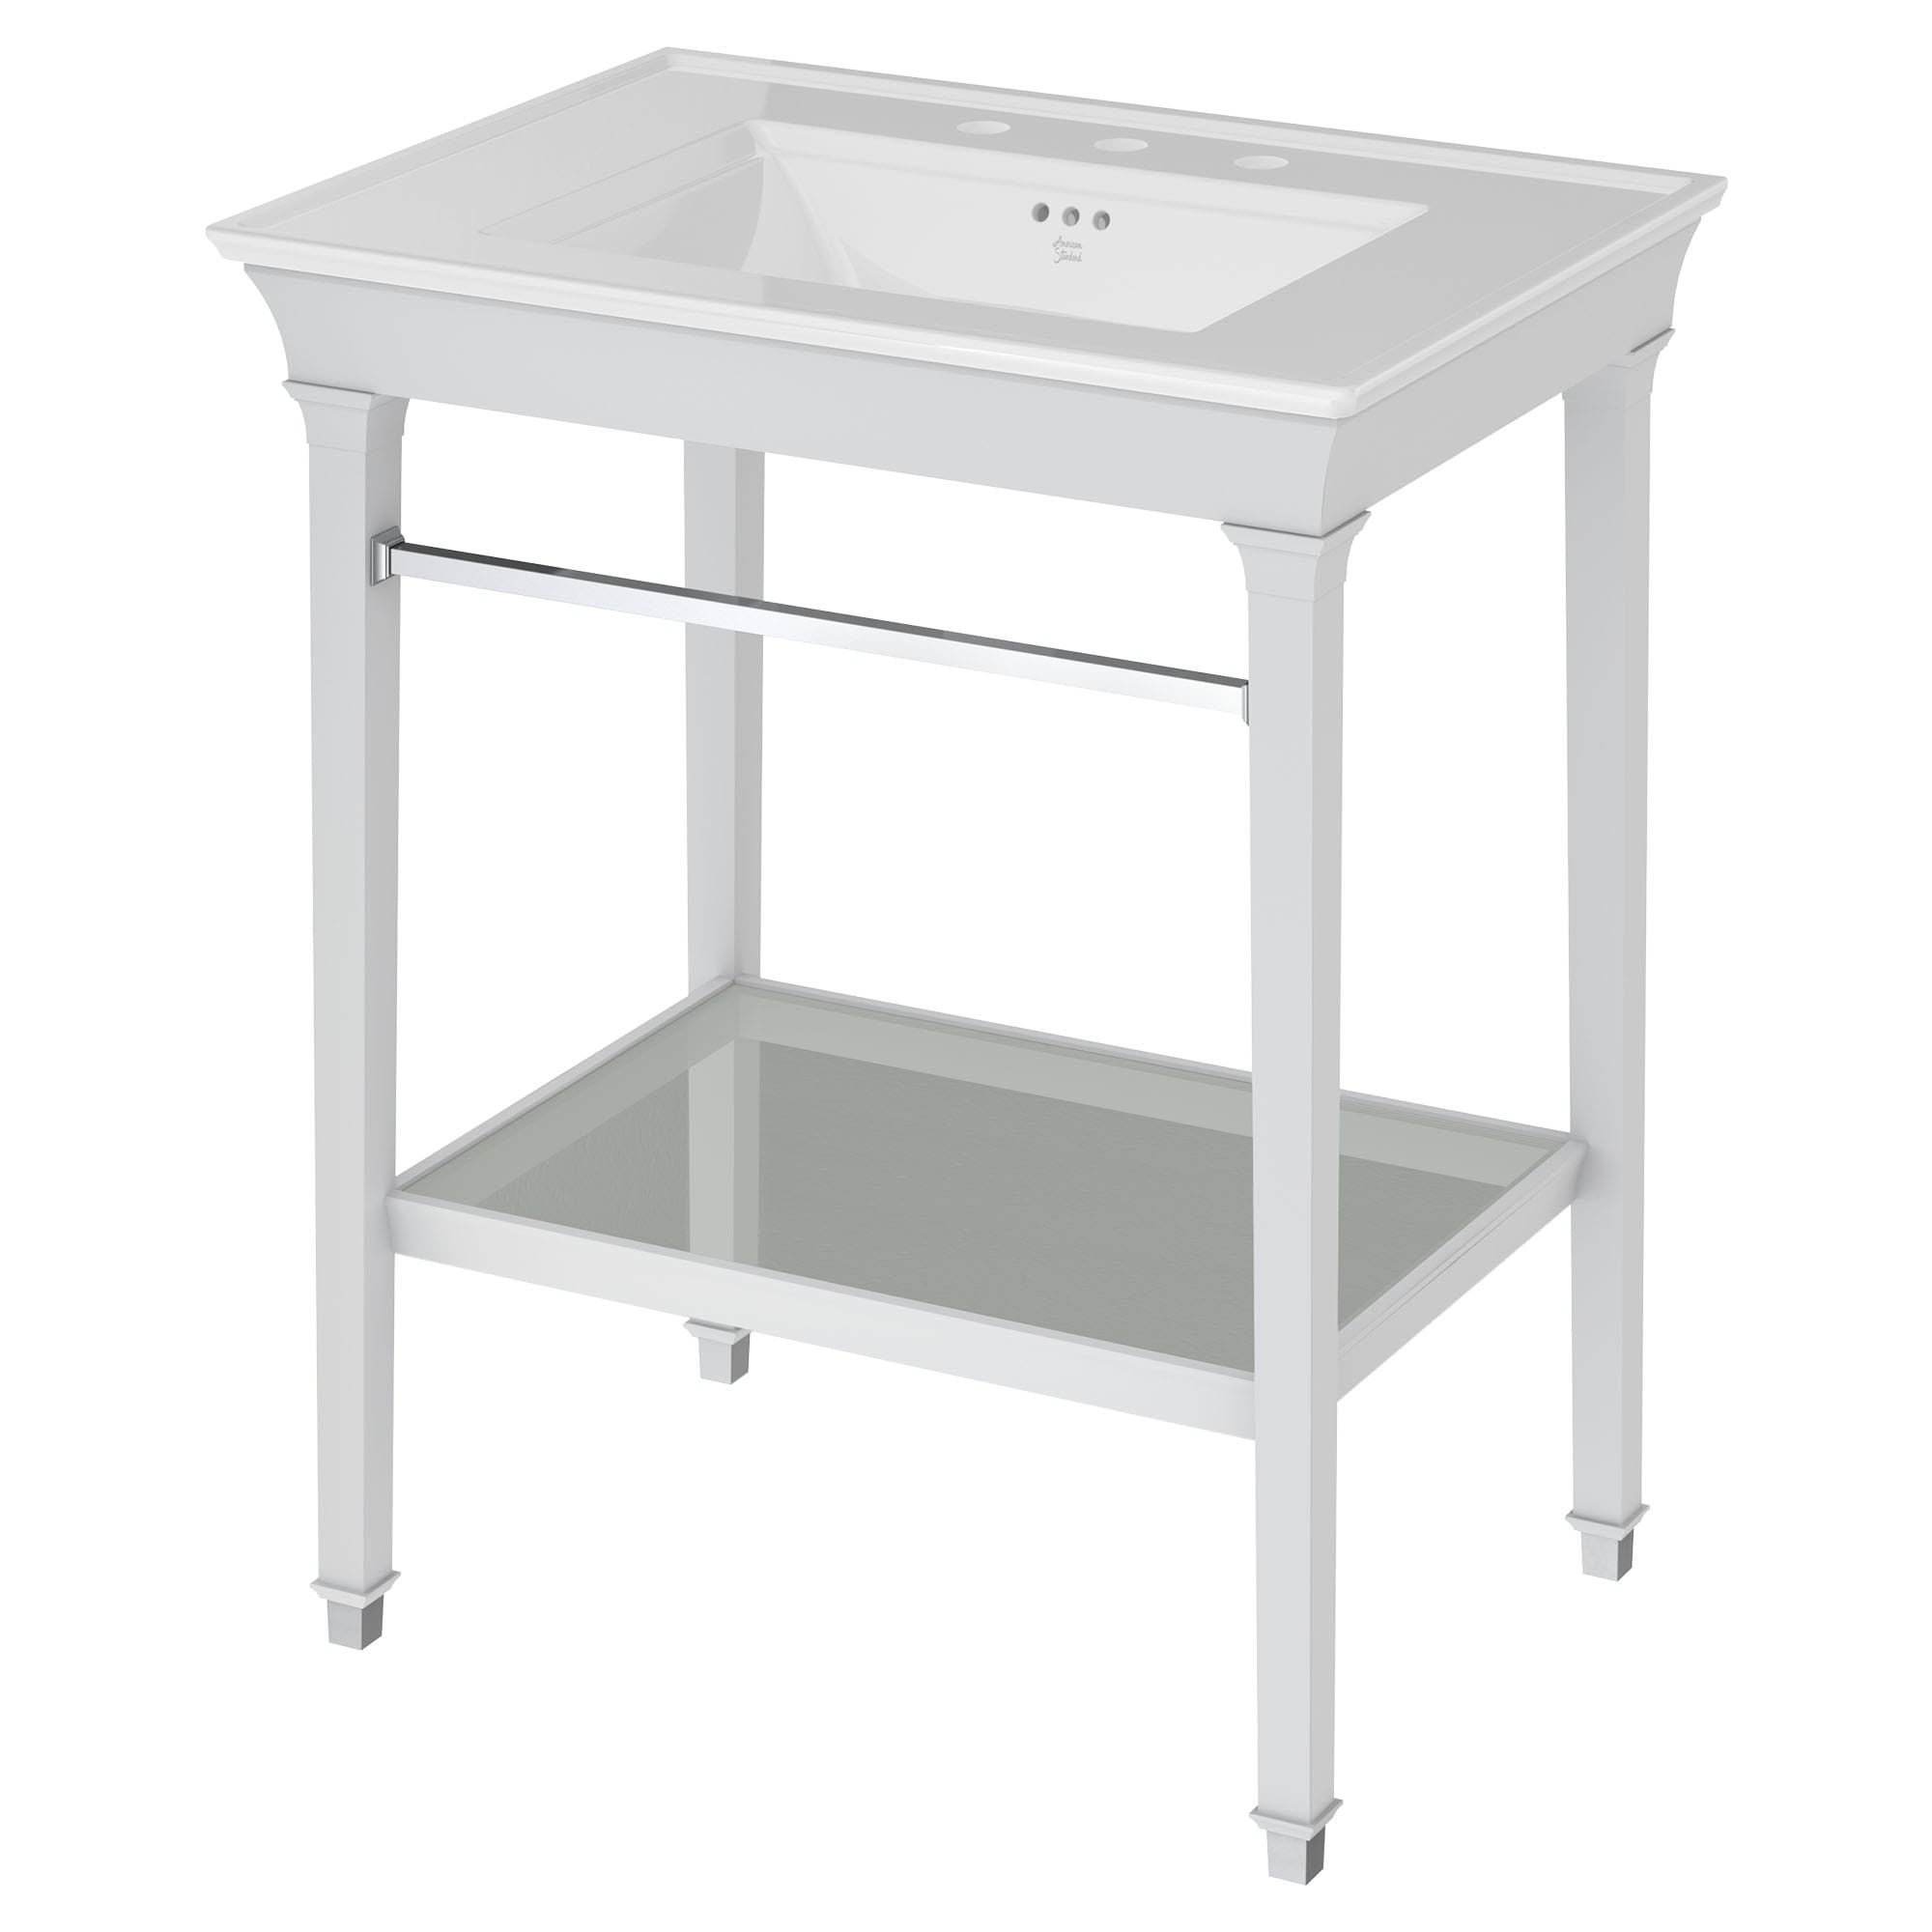 Town Square® S Washstand Towel Bar